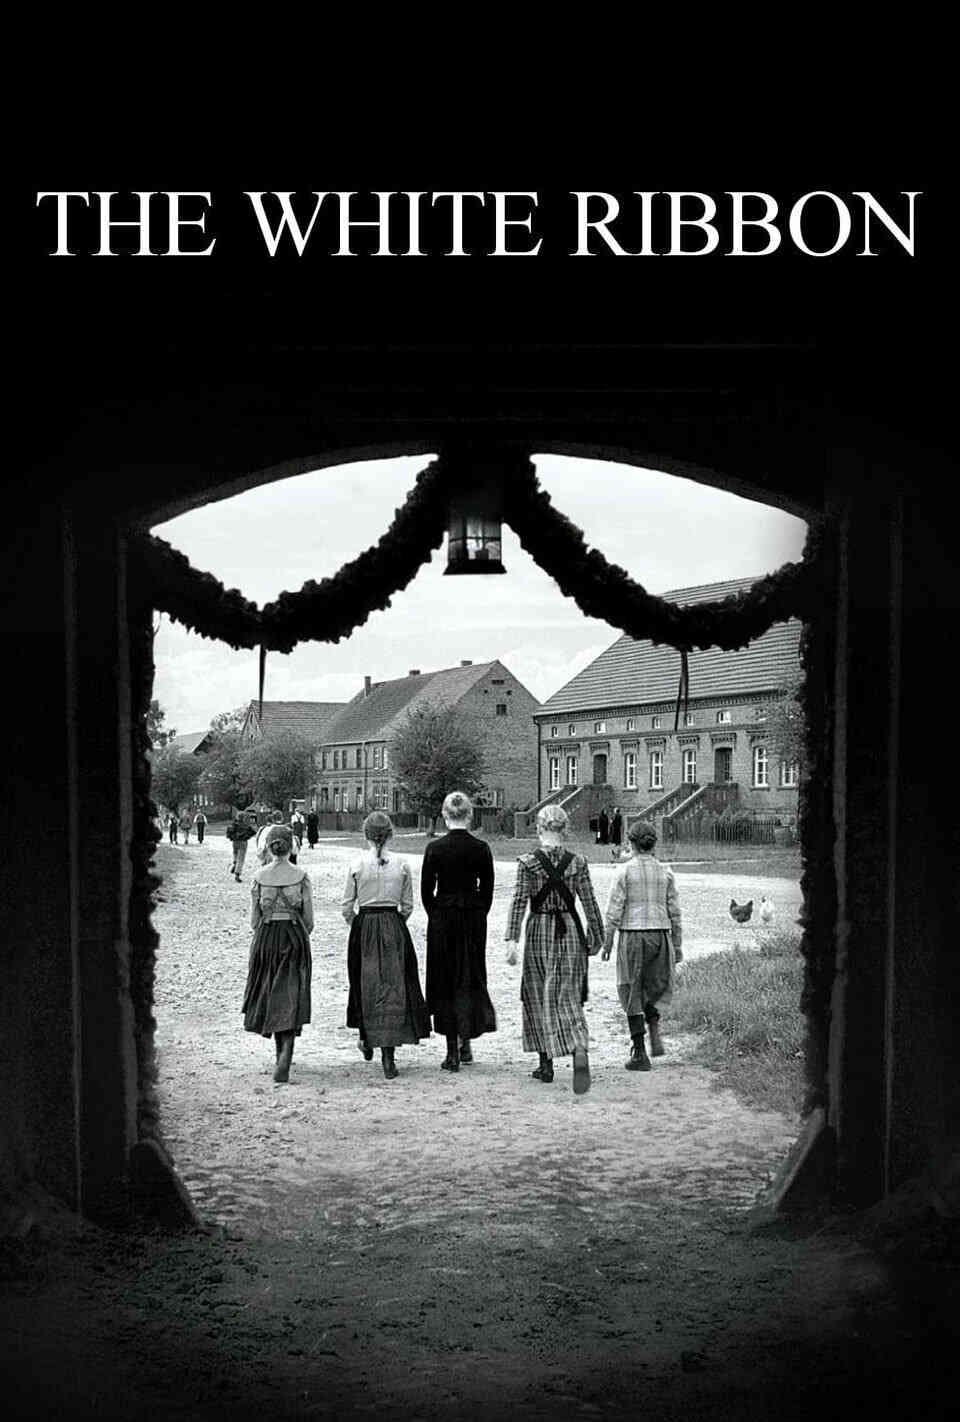 Read The White Ribbon screenplay (poster)